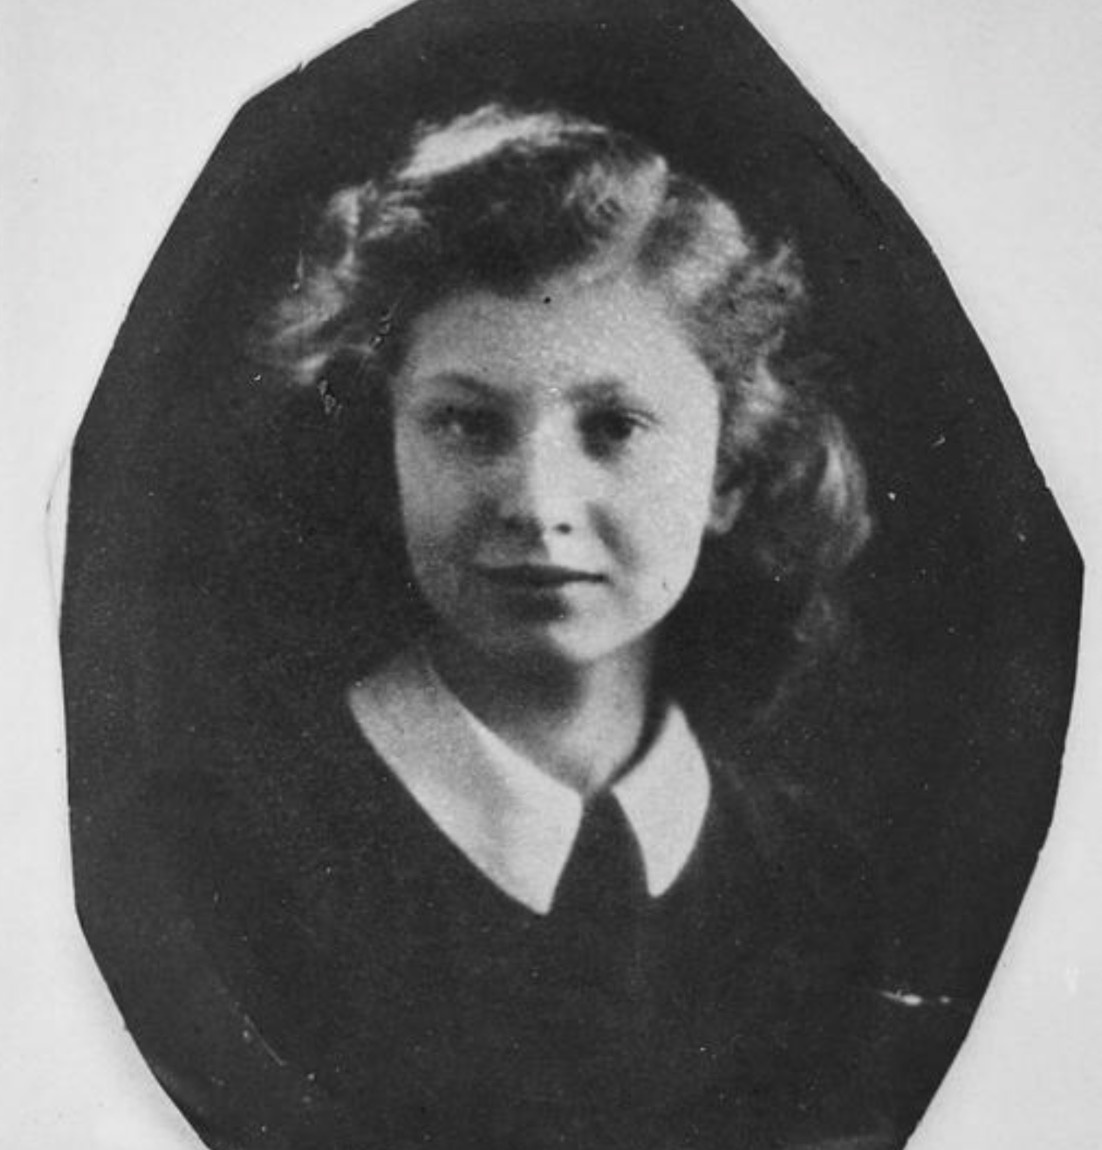 4 December 1926 | Polish Jewish girl, Golda Bretmel, was born in Żelechów. She emigrated to France. She was deported to #Auschwitz from Angers on 20 July 1942. She did not survive.